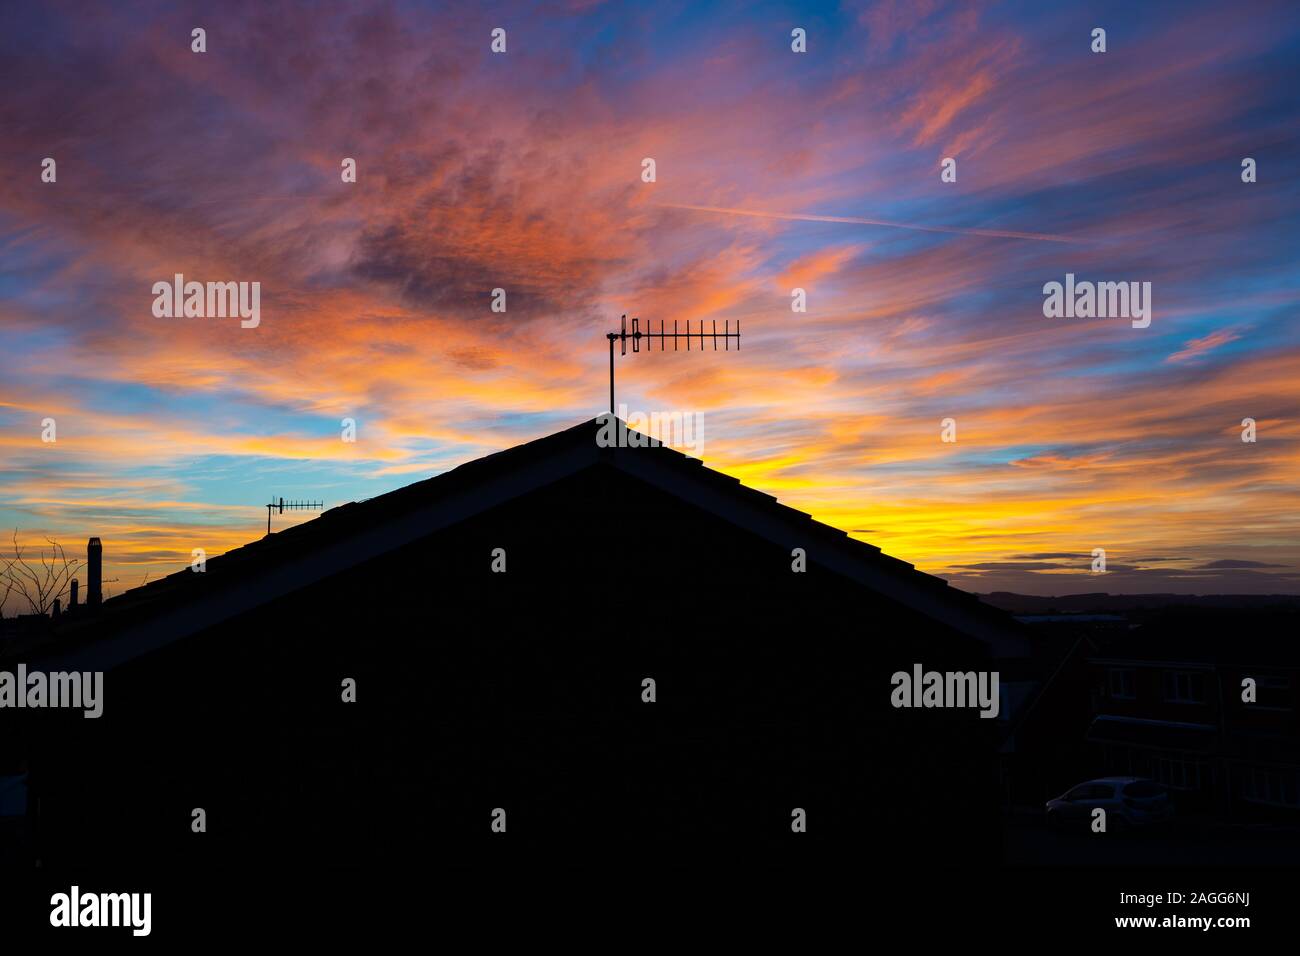 A beautiful Sunrise, sunset over a house in Longton, Fenton, Stoke on Trent in Staffordshire, TV aerial in silhouette Stock Photo